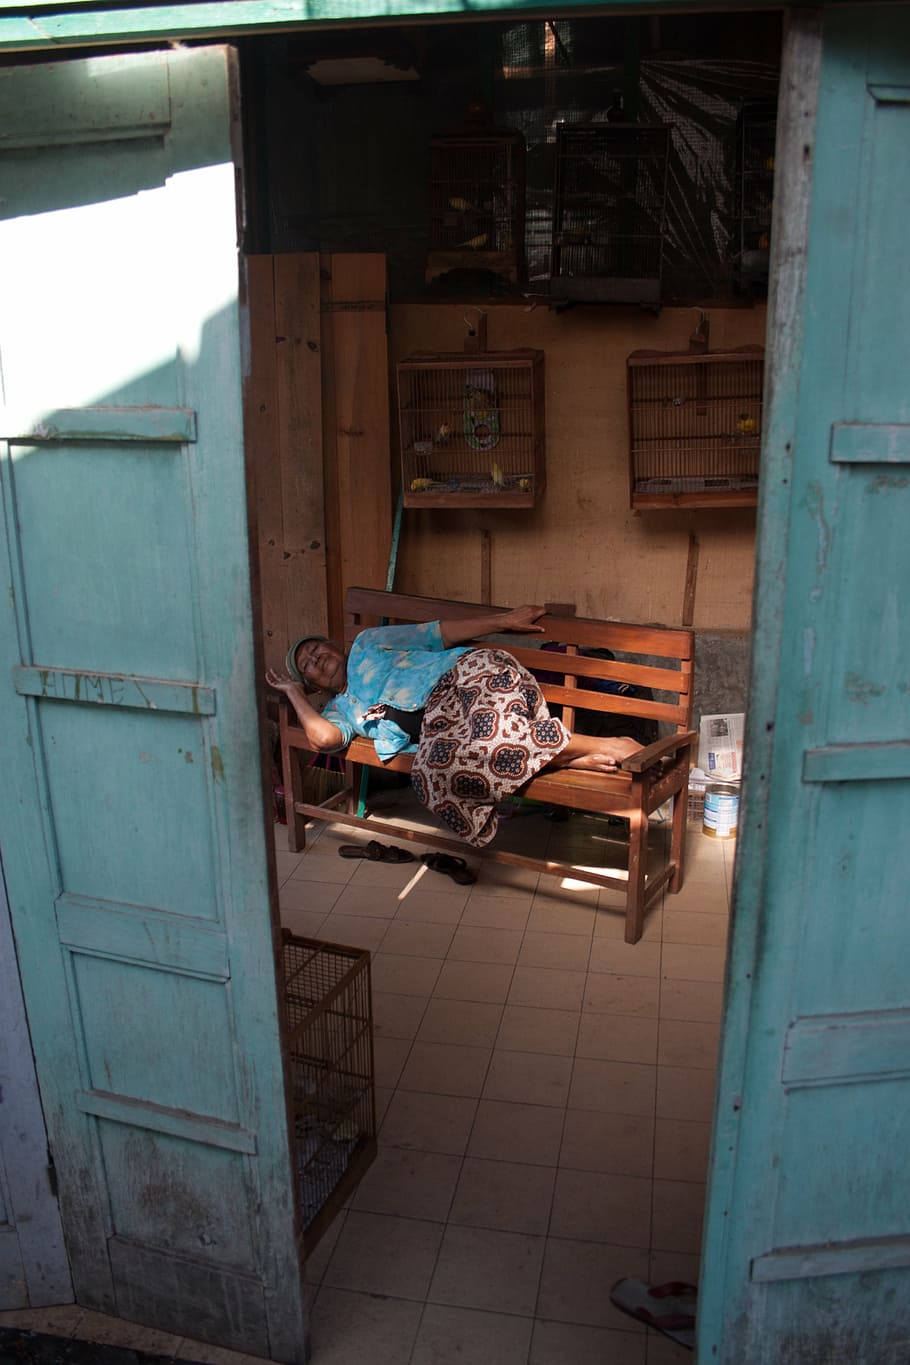 indonesia, woman, sleep, siesta, observed, indoors, architecture, wood - material, abandoned, building